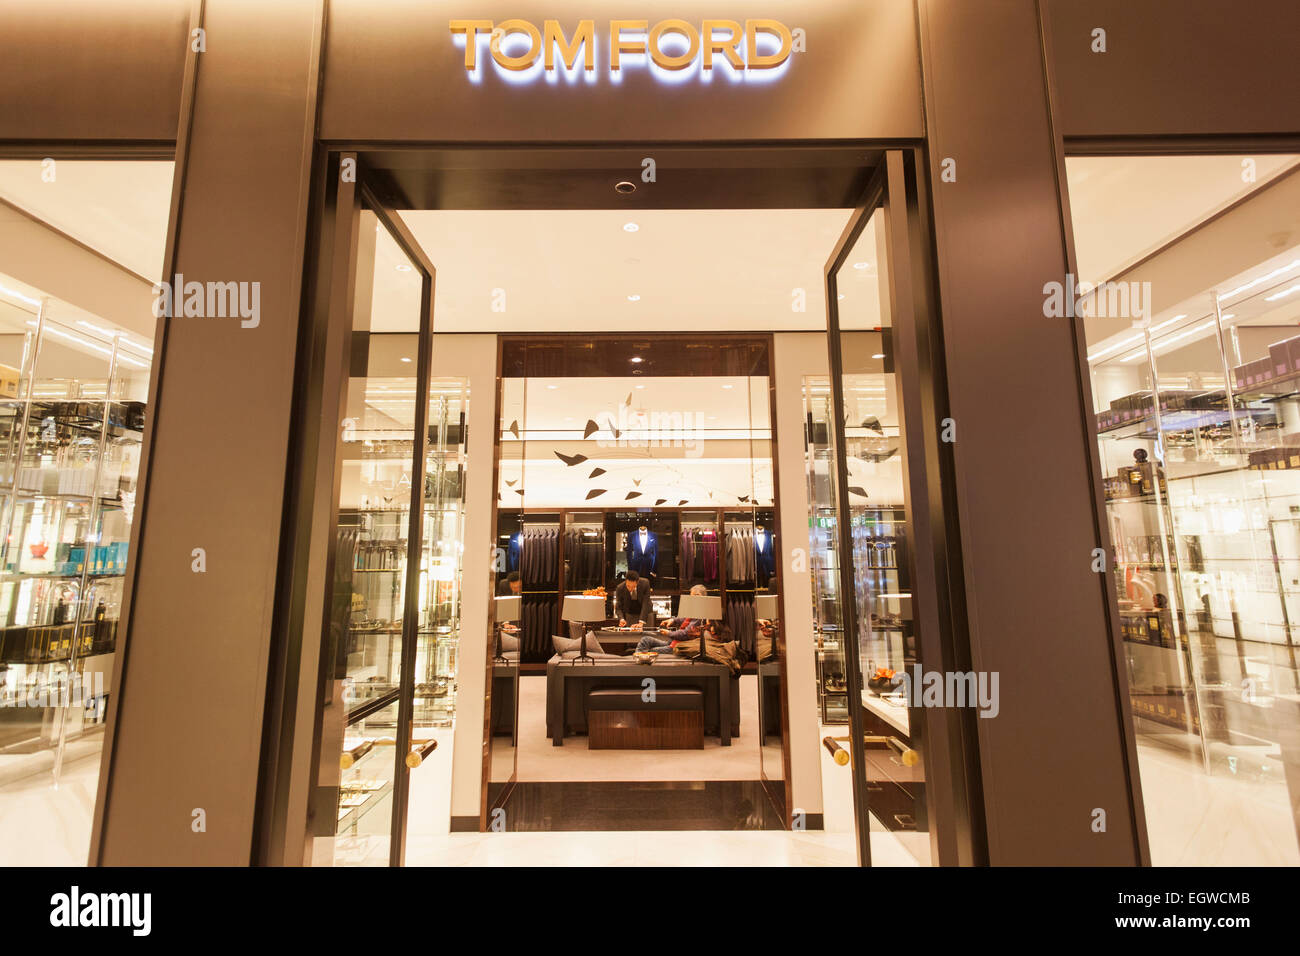 China, Hong Kong, Central, IFC Mall, Tom Ford Store Stock Photo - Alamy